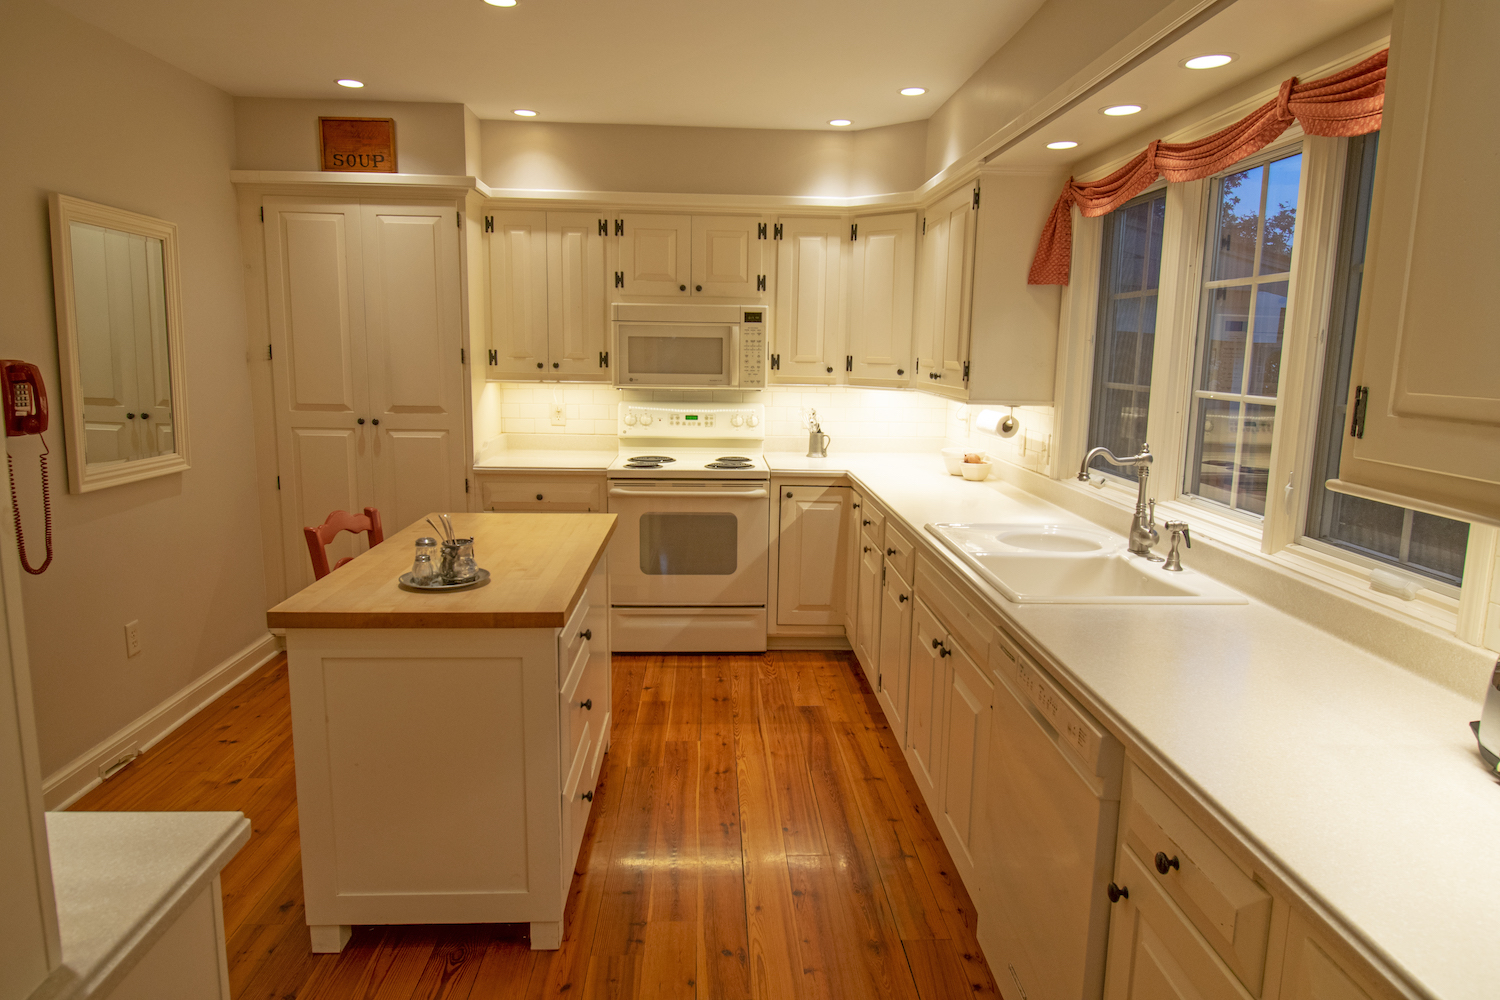 A photograph of a kitchen with white cabinets, walls, and countertops, and nice hardwood floor. There is lighting underneath the cabinets, circle lights in the ceiling, and everything is very well lit.